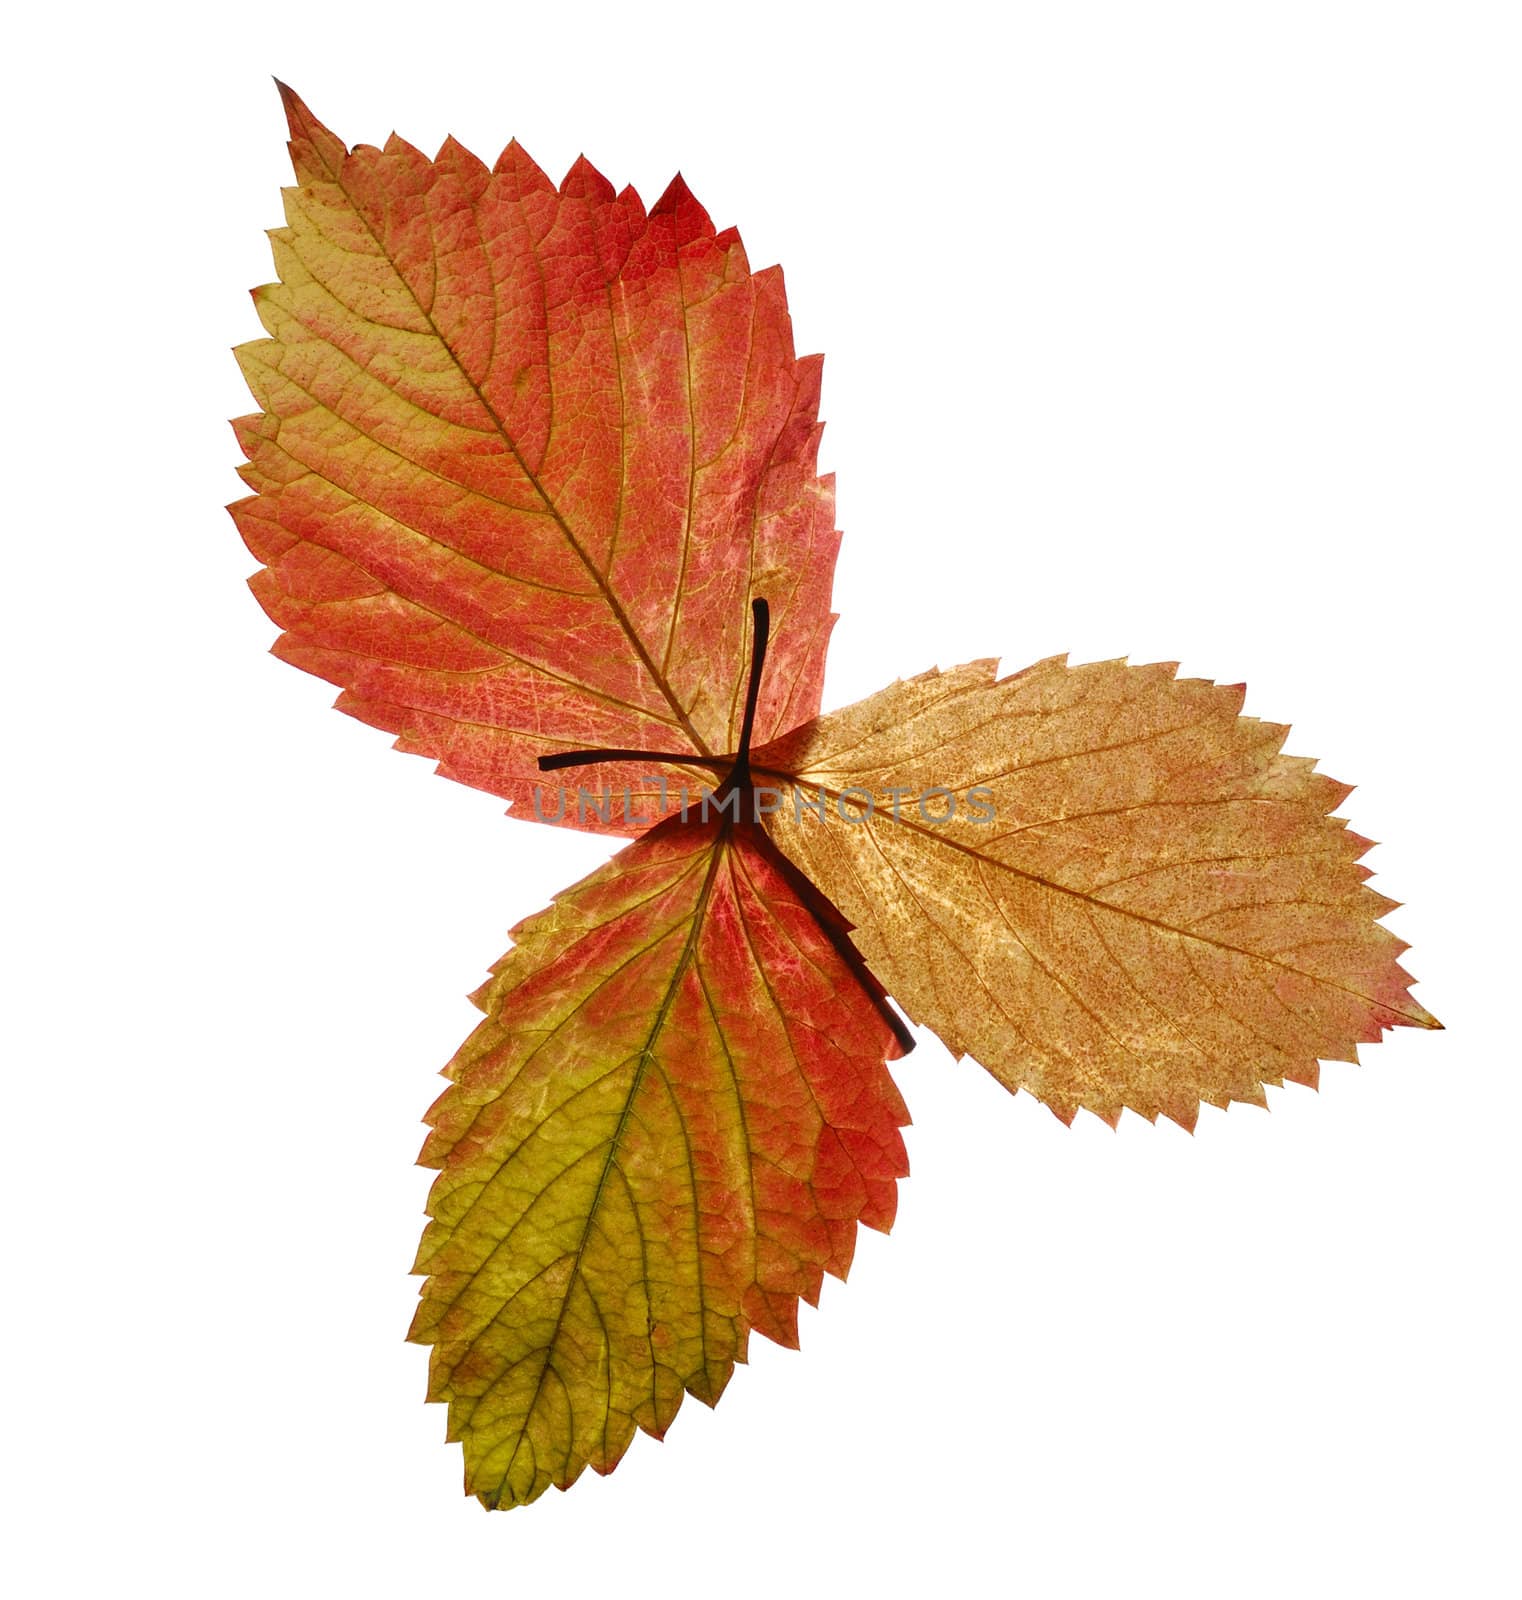 Bouquet from autumn leaves. It is isolated on a white background.